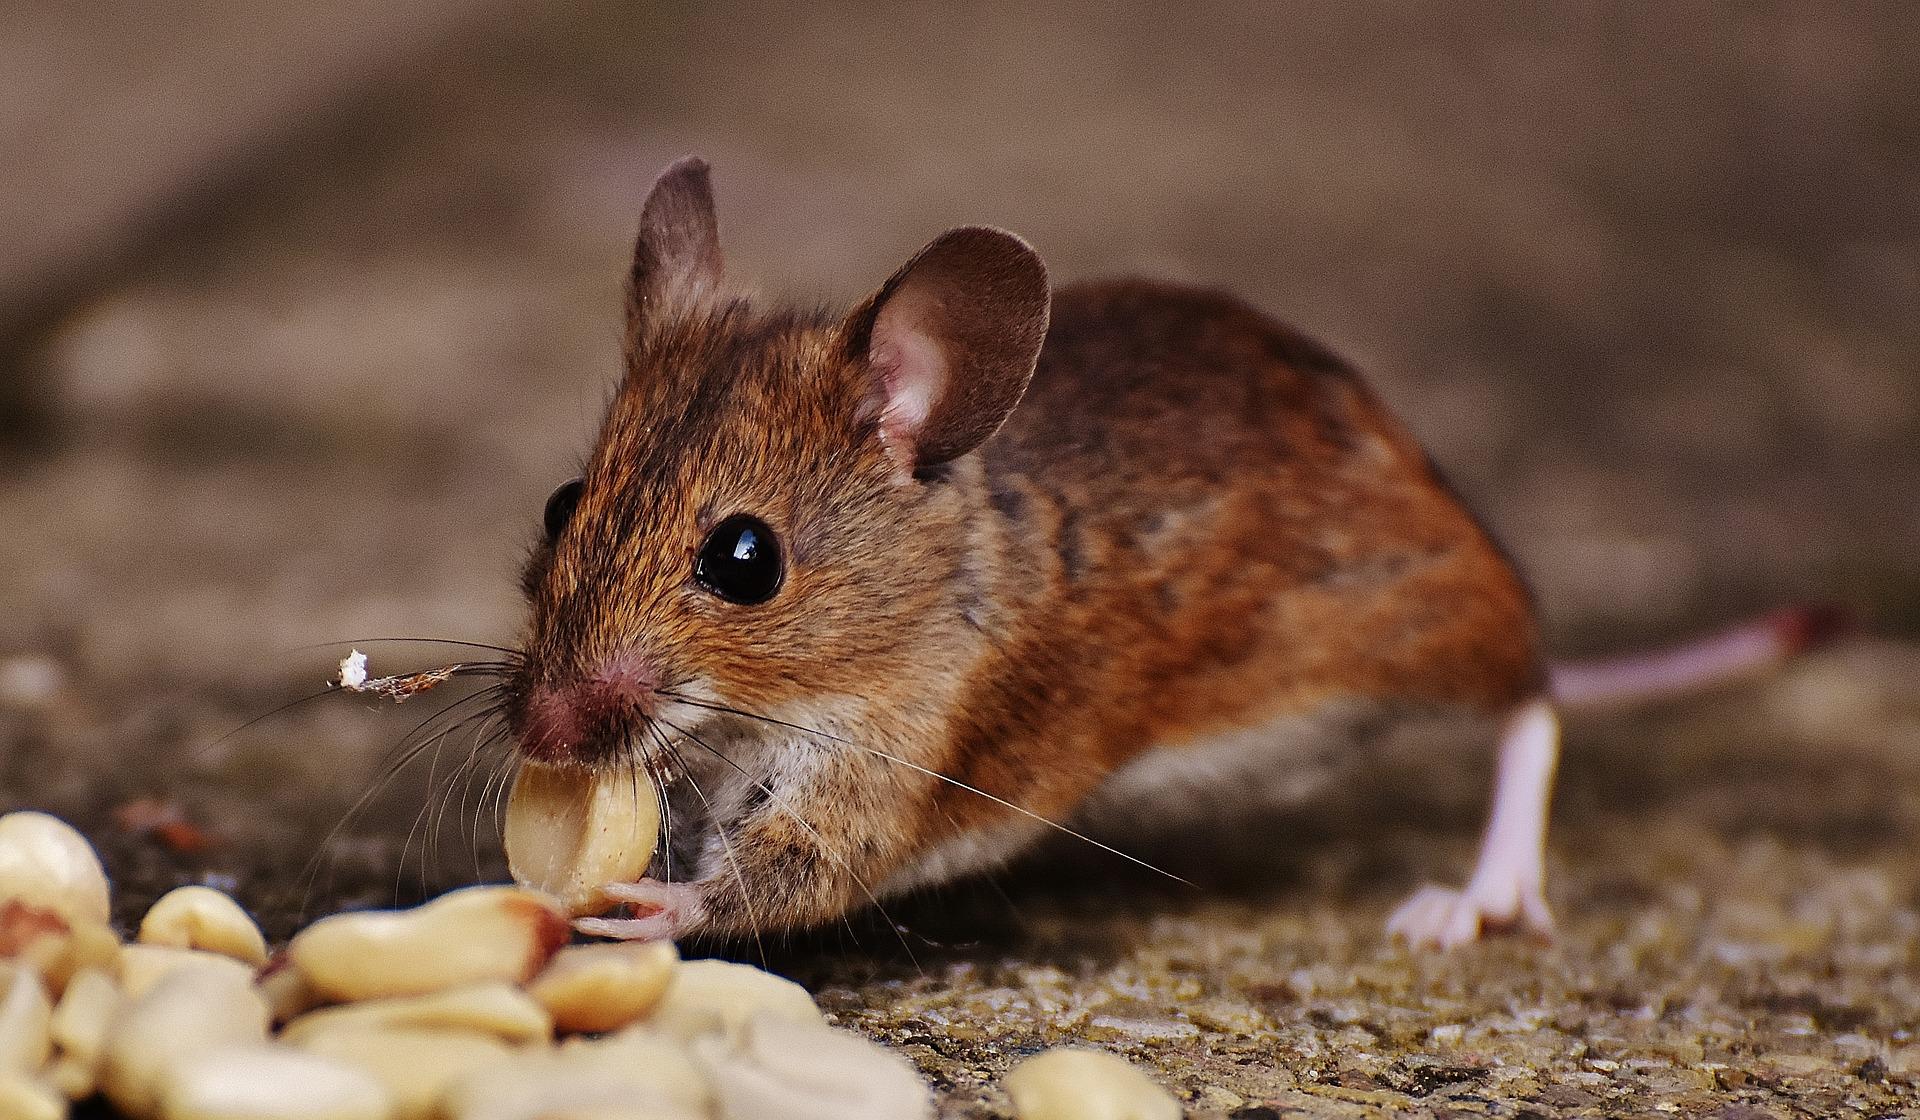 Mouse eating peanuts